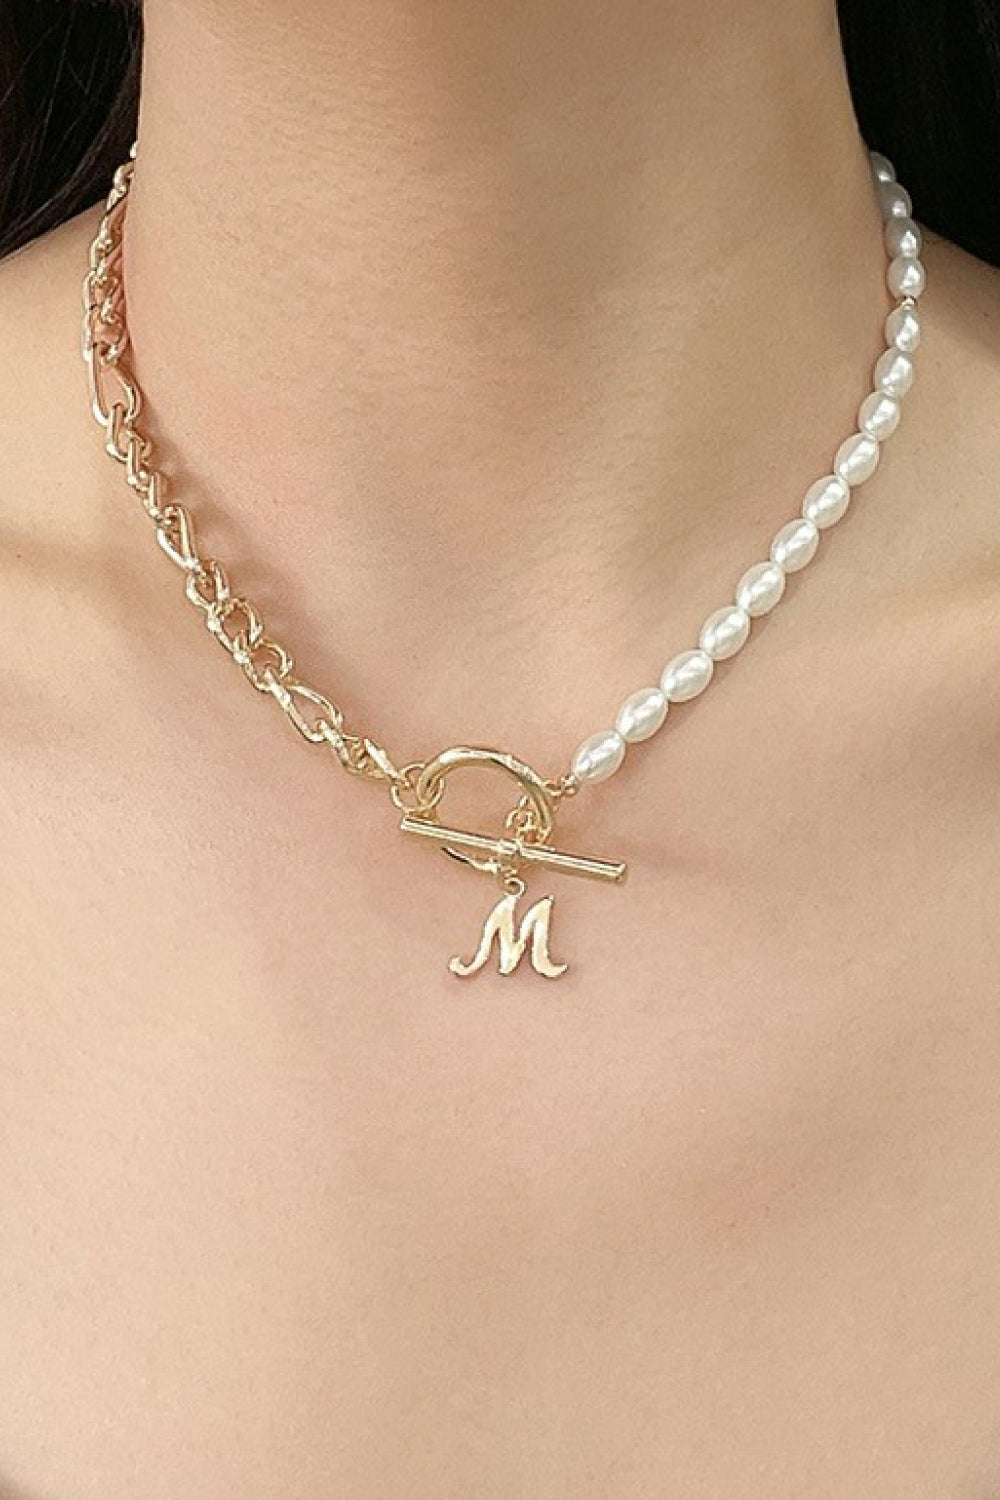 Alphabet M Pendant Half Pearl and Half Chain Necklace - Necklaces - FITGGINS